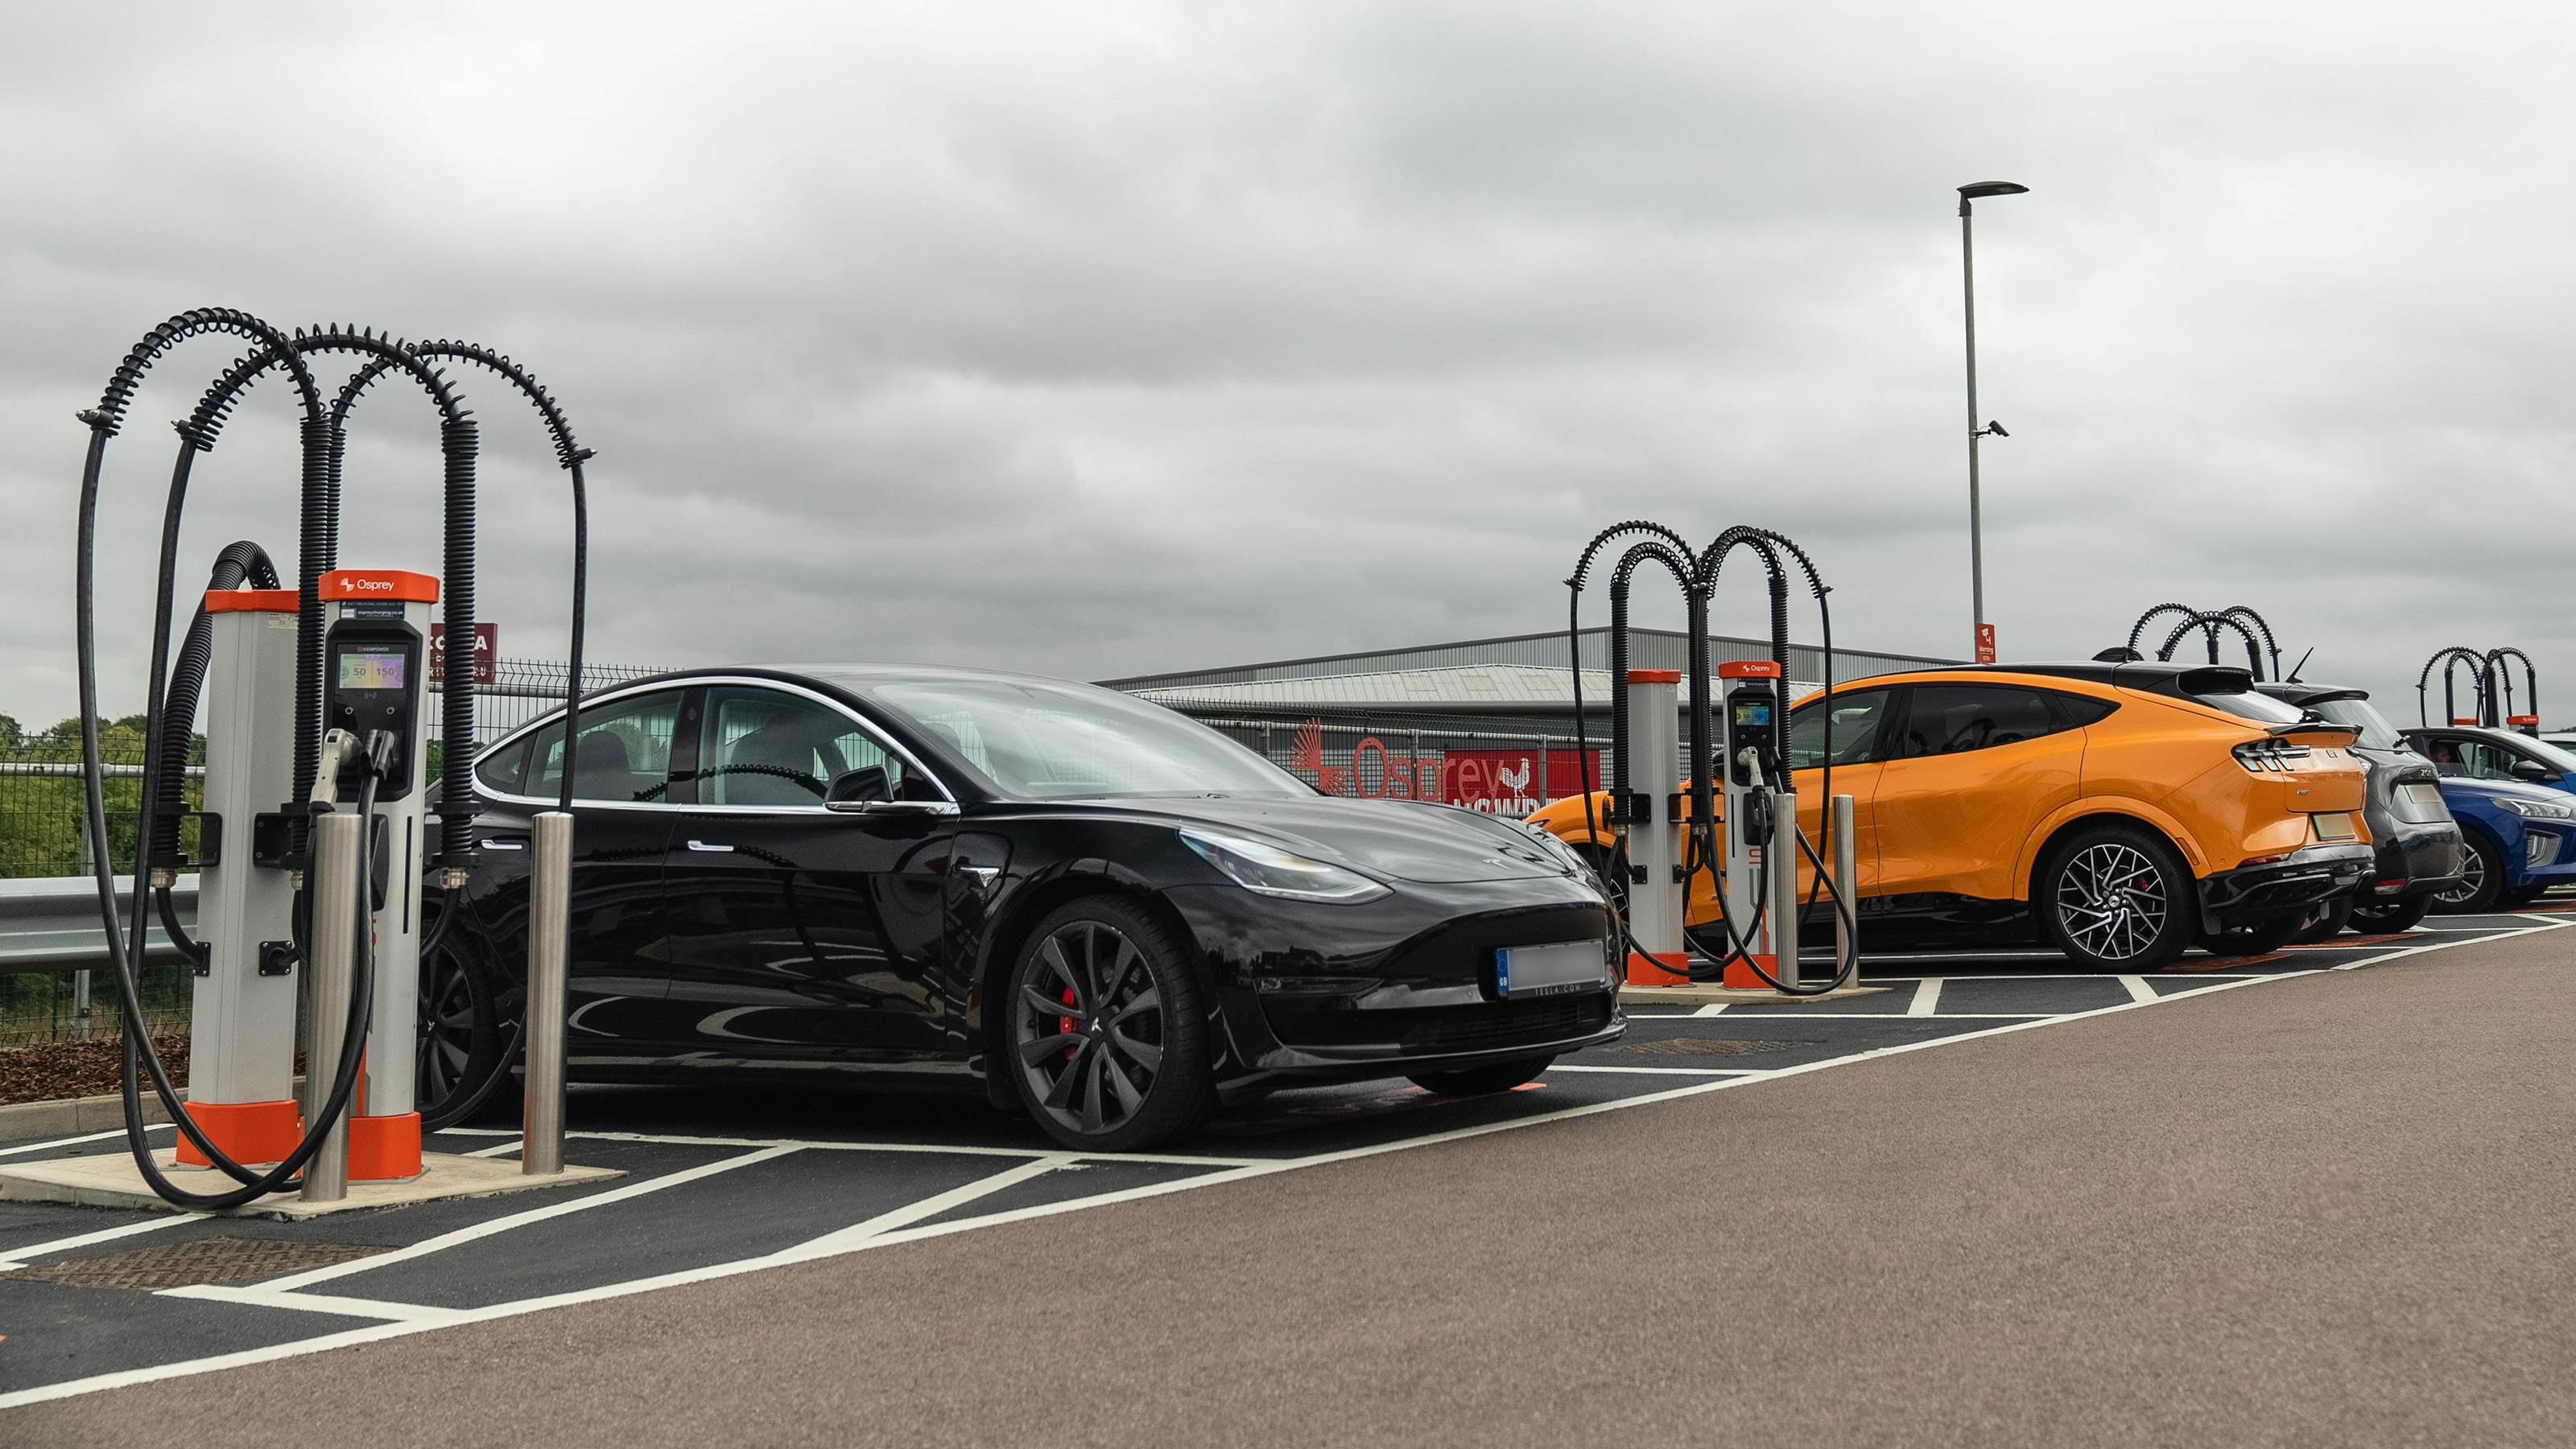 World's fastest EV charging station promises a full battery in under 15  minutes - CNET